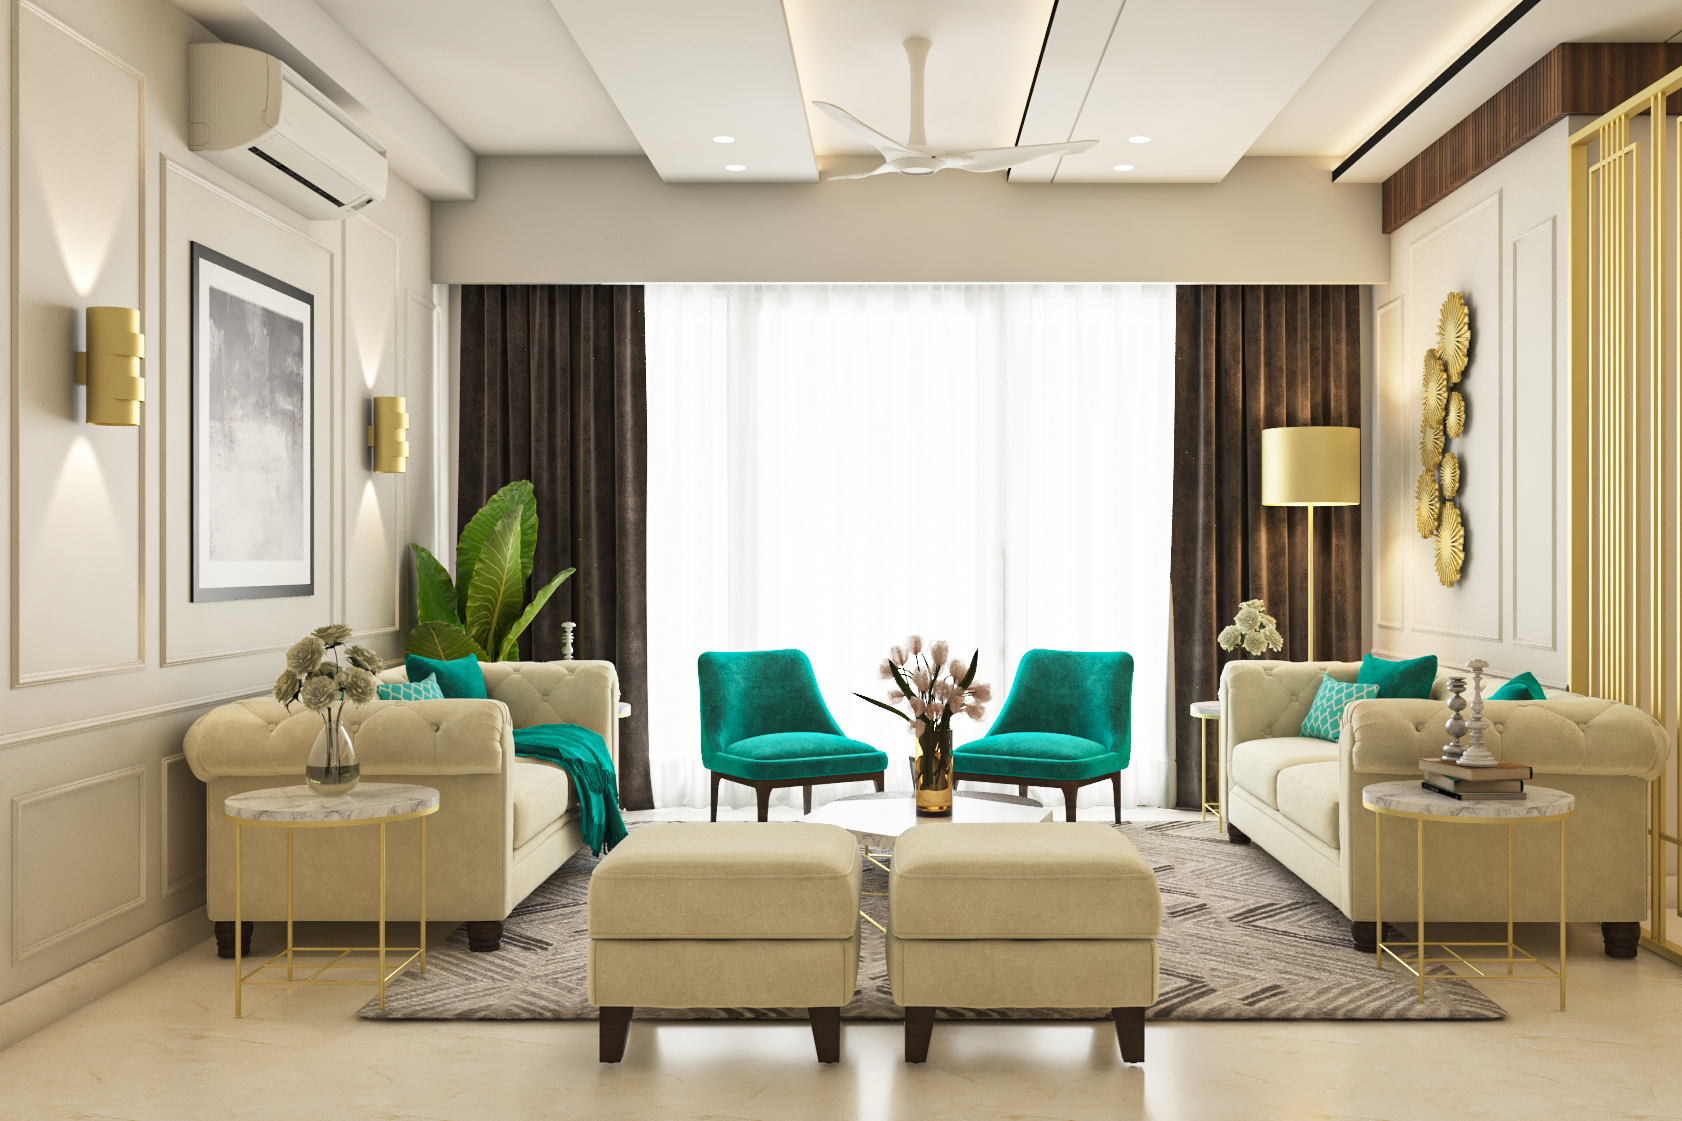 Classic Pearl White Living Room Design With Turquoise Blue Chairs